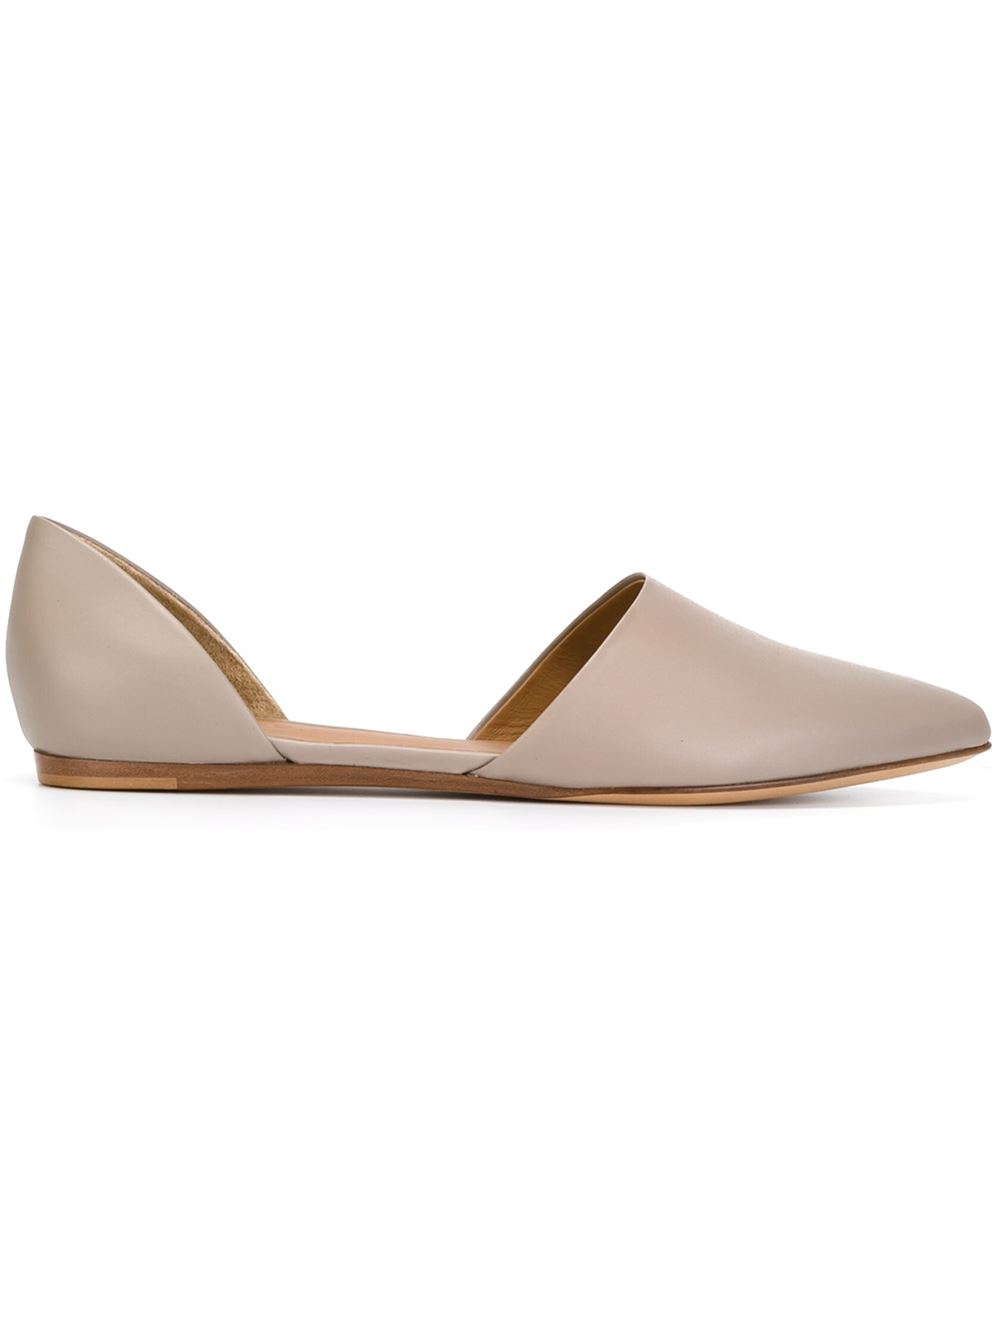 Vince Pointed Toe Ballerinas in Natural 